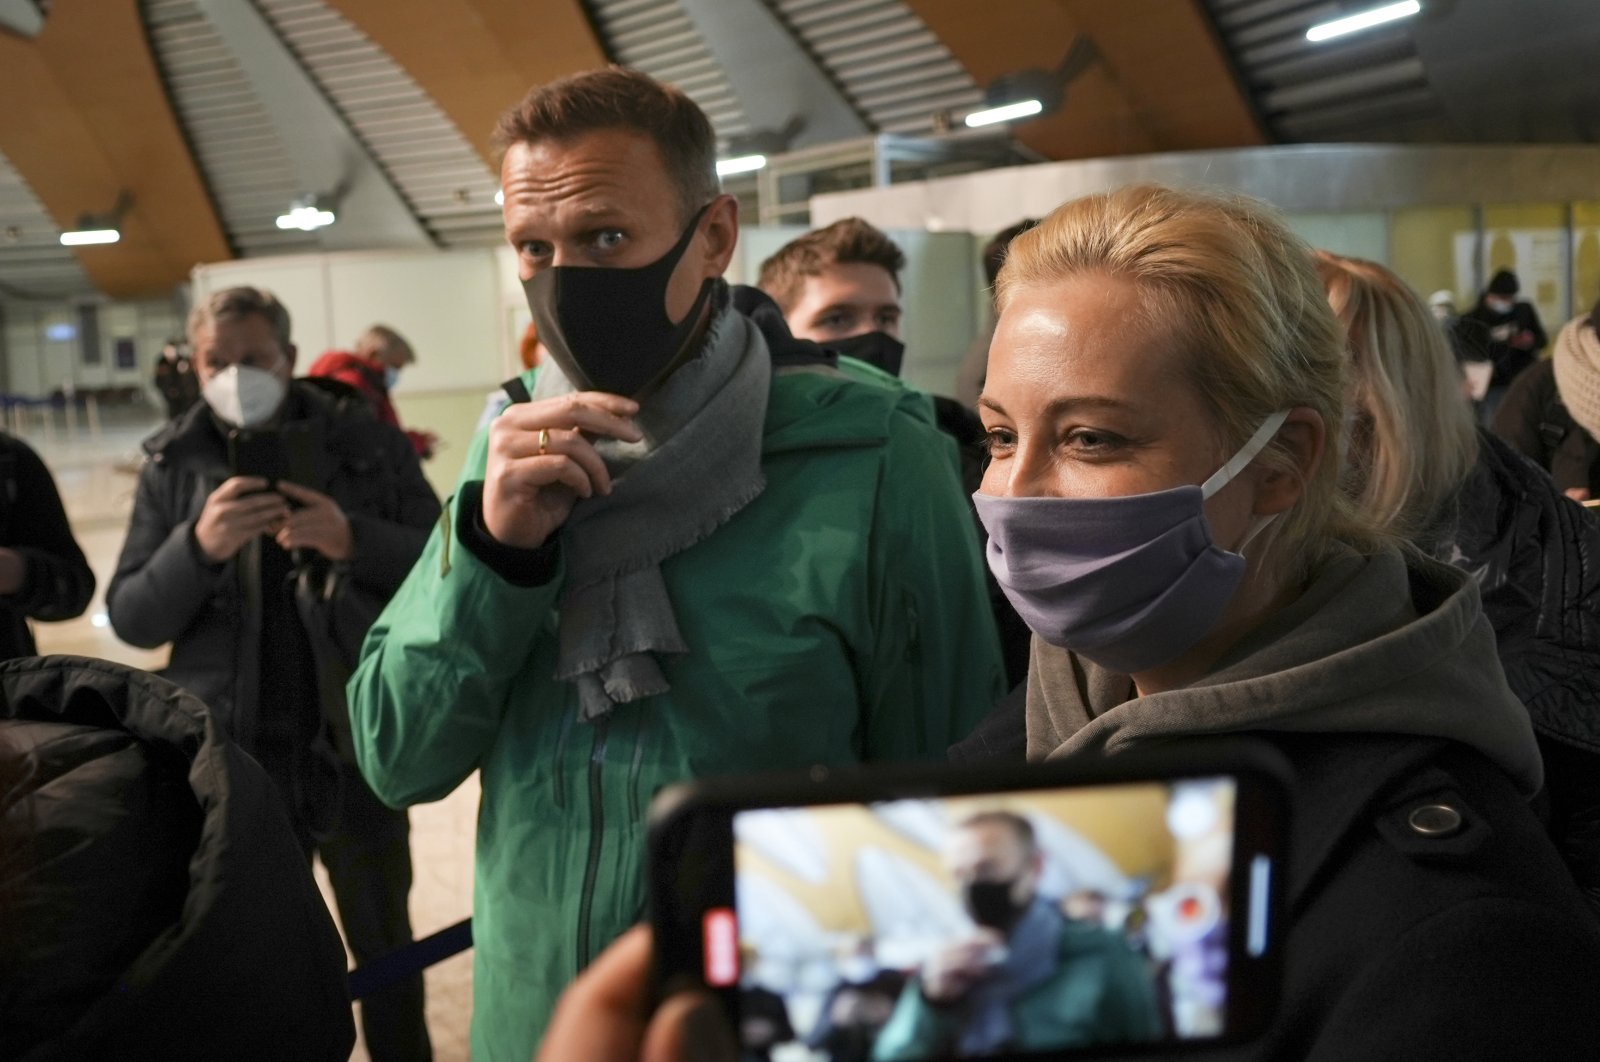 Alexei Navalny and his wife Yuliastand stand in line at the passport control after arriving at Sheremetyevo airport, outside Moscow, Russia, Jan. 17, 2021. (AP Photo)